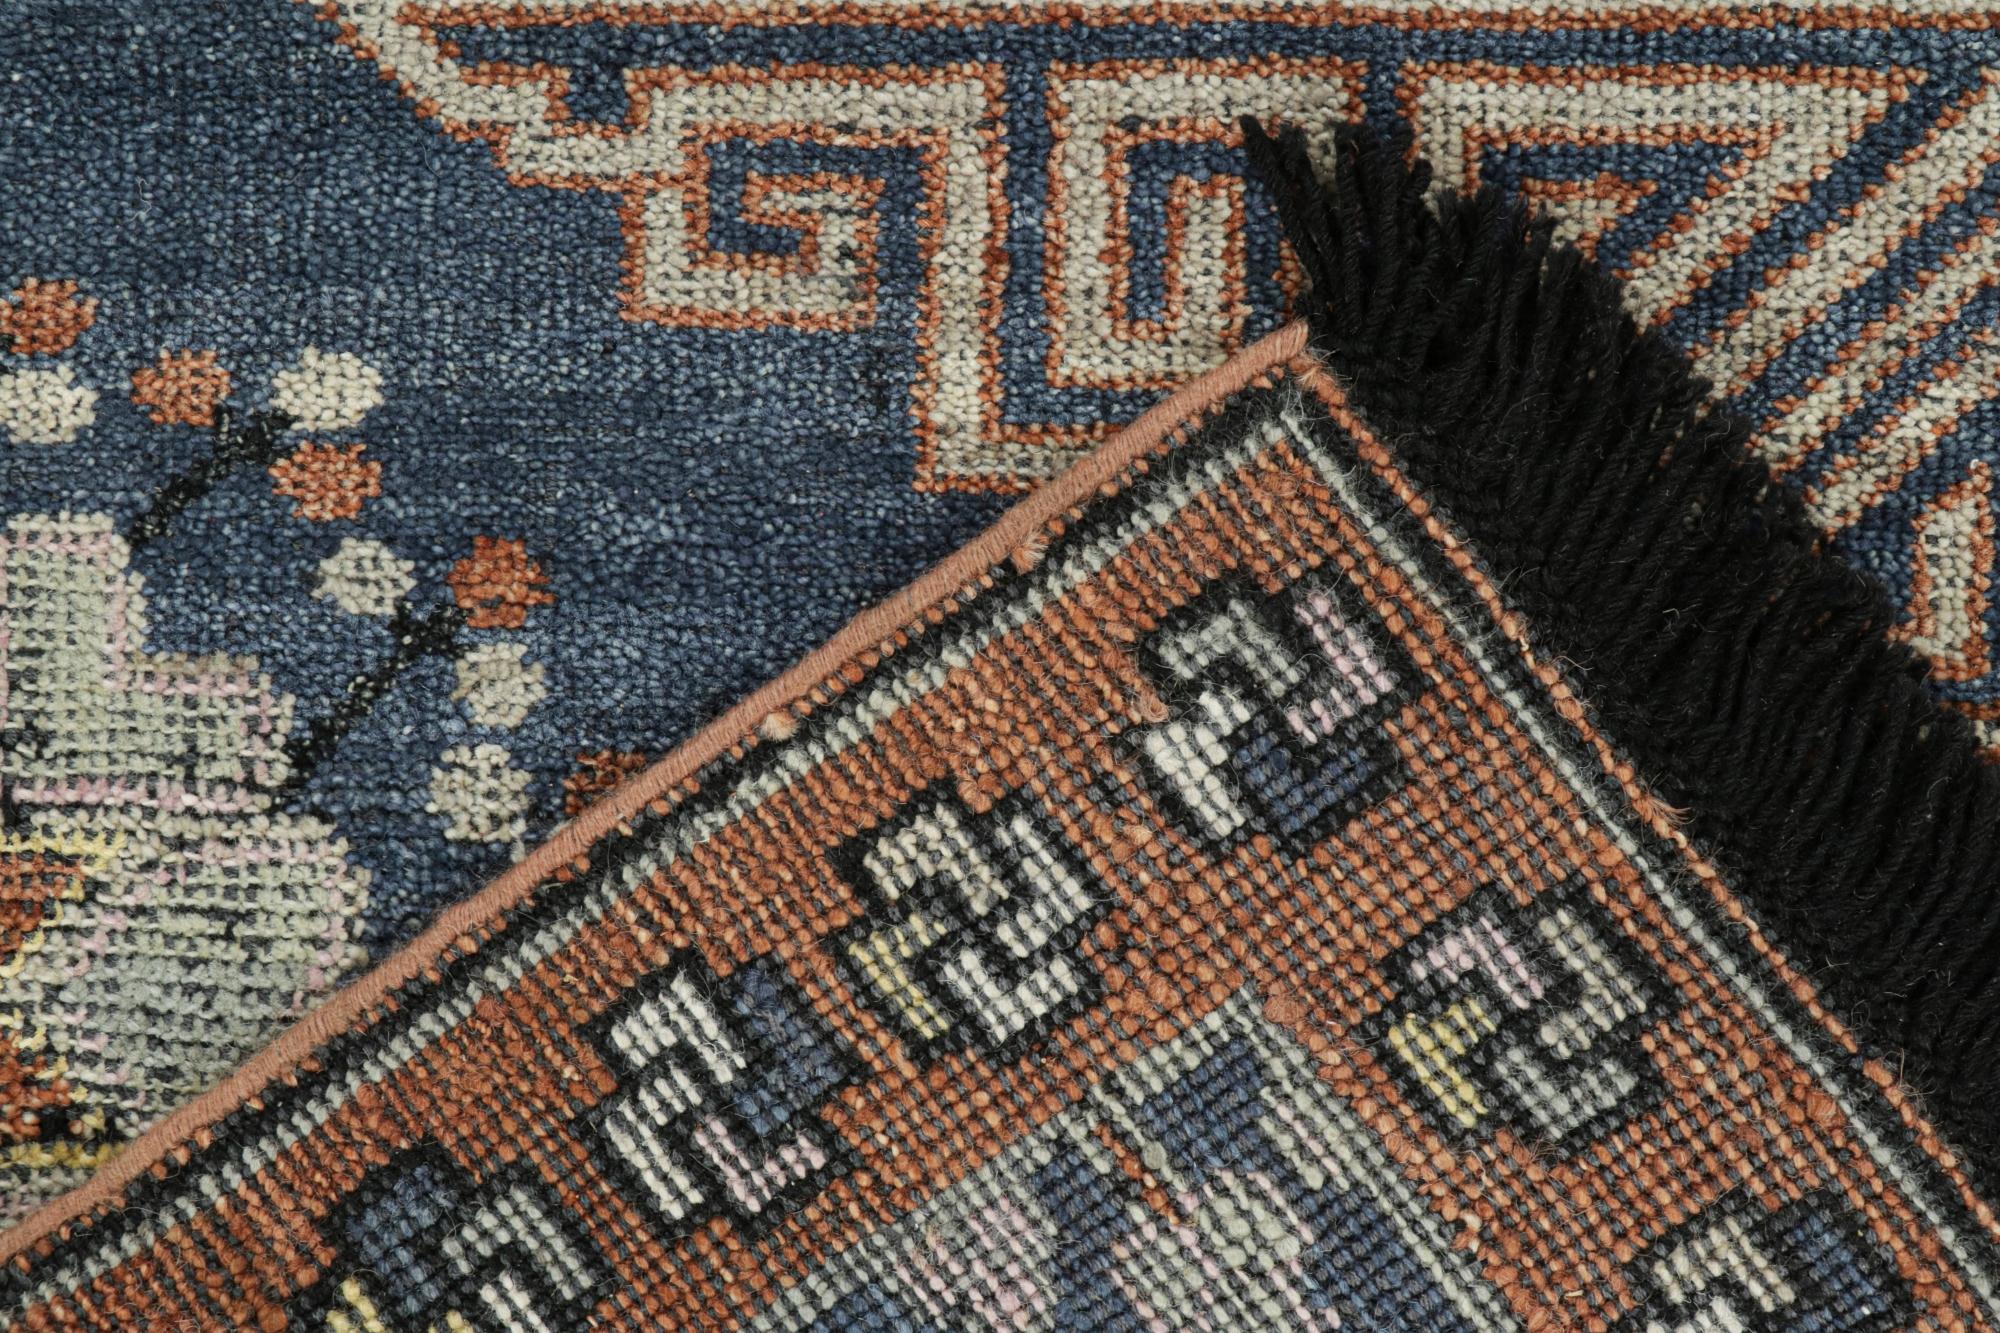 Contemporary Rug & Kilim’s Khotan inspired rug in Brown & Blue Geometric Patterns For Sale